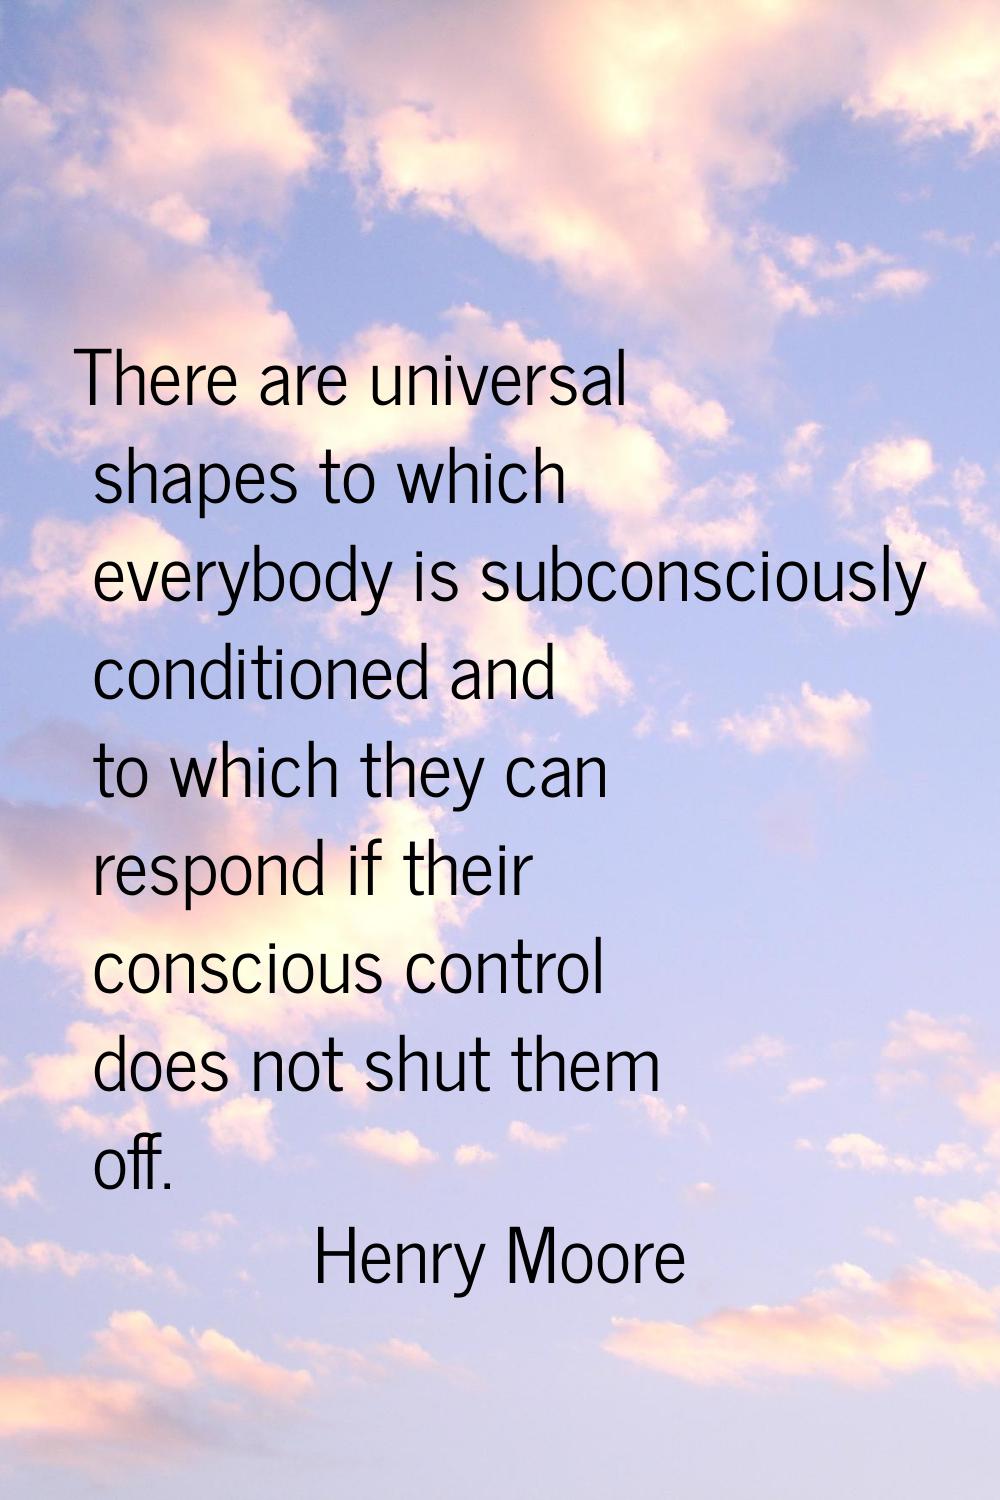 There are universal shapes to which everybody is subconsciously conditioned and to which they can r